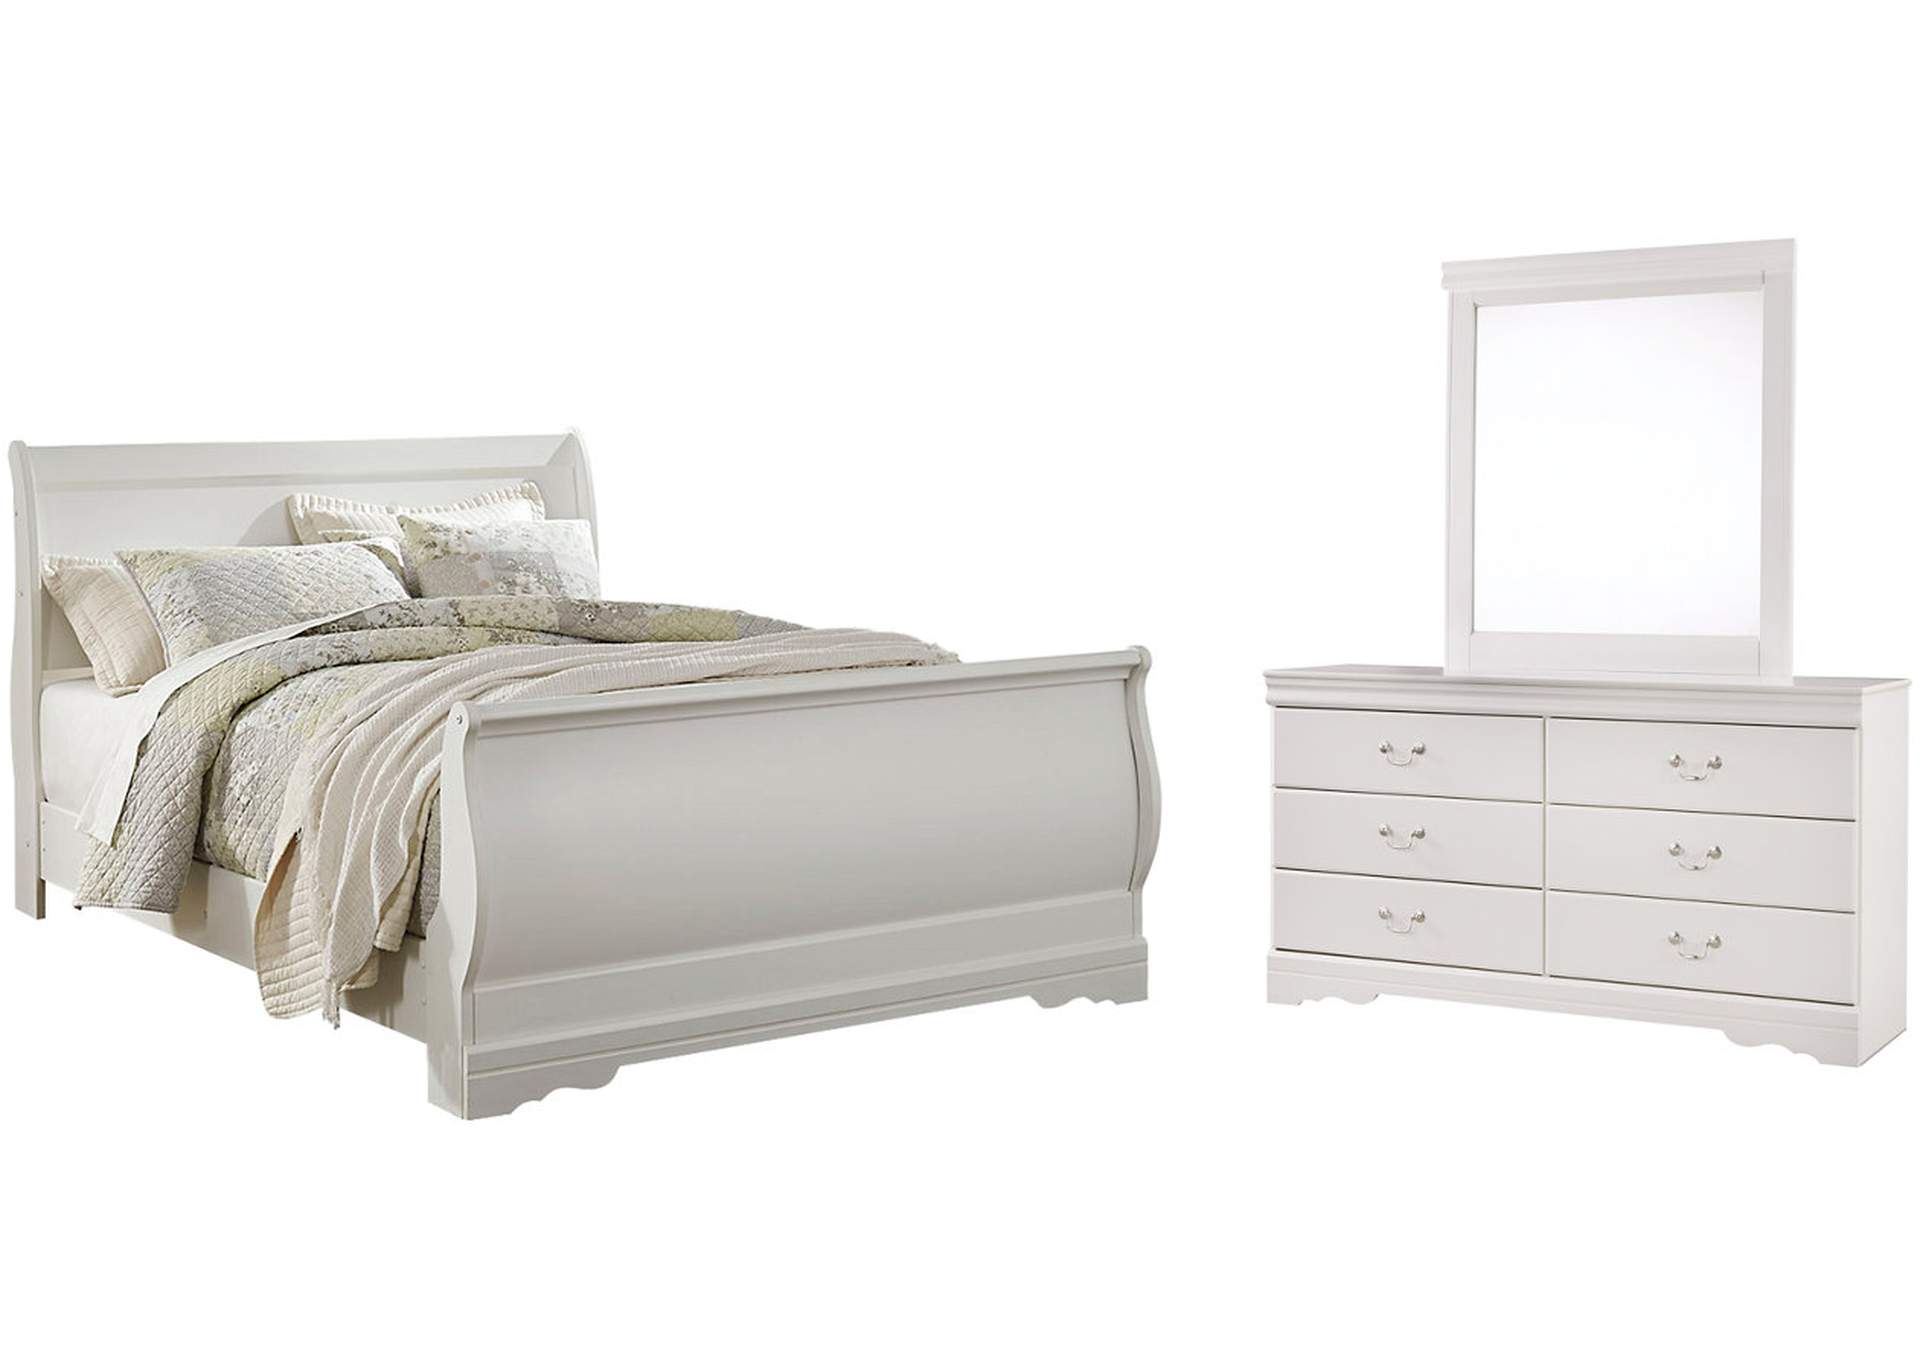 Anarasia Queen Sleigh Bed with Mirrored Dresser,Signature Design By Ashley